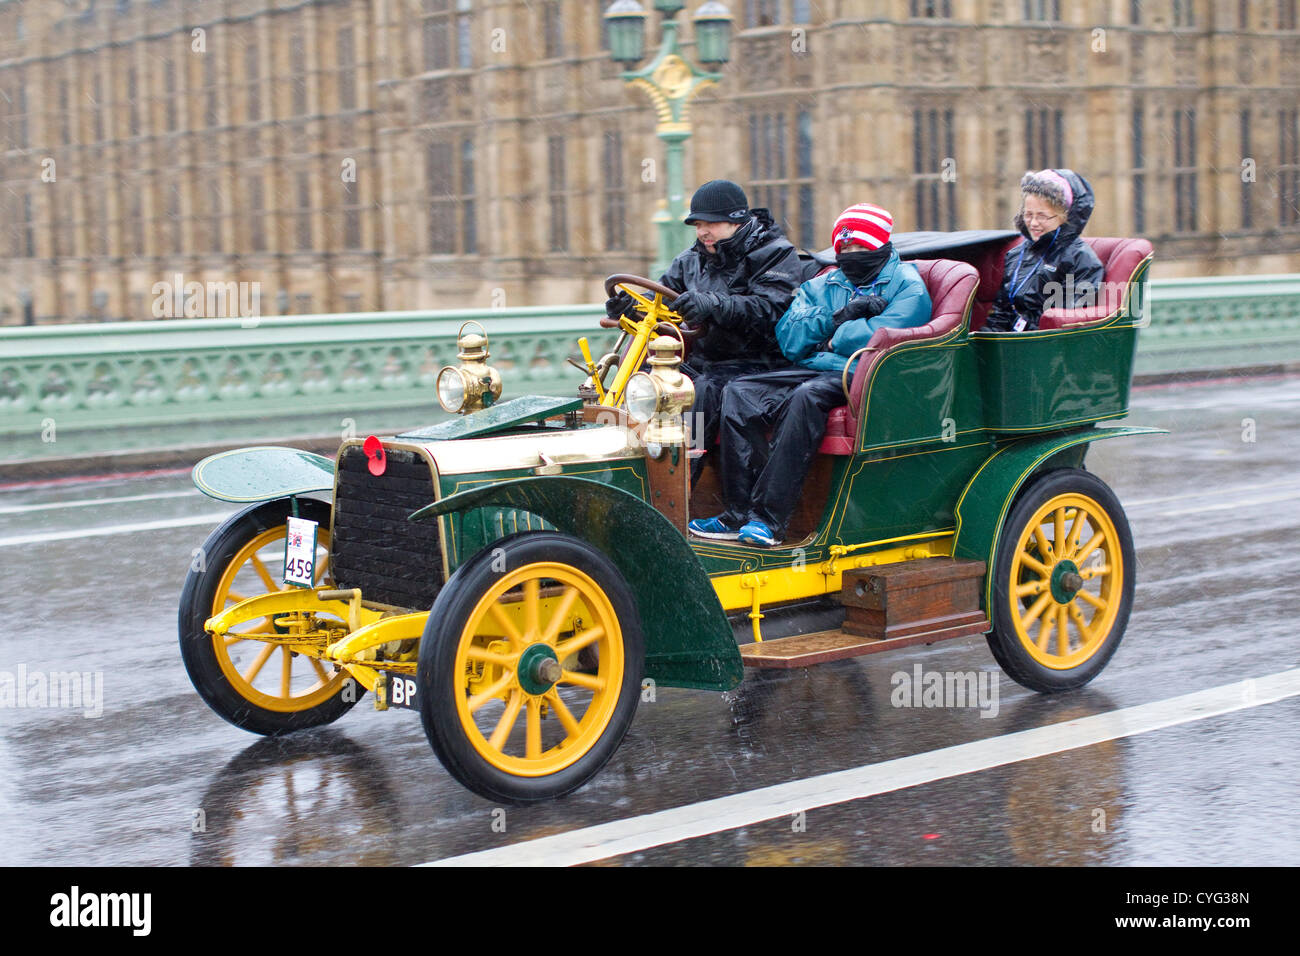 Royal Automobile Club's annual Veteran Car Run London to Brighton. 04.11.2012 Picture shows No.459 a 1904 Darracq driven in wet conditions by Lawrie Smith crossing Westminster Bridge, one of many classic vehicles taking part in this years London to Brighton Veteran Car Run 2012 starting at Hyde Park in Central London and finishing at the seafront on the Sussex resort of Brighton. Stock Photo